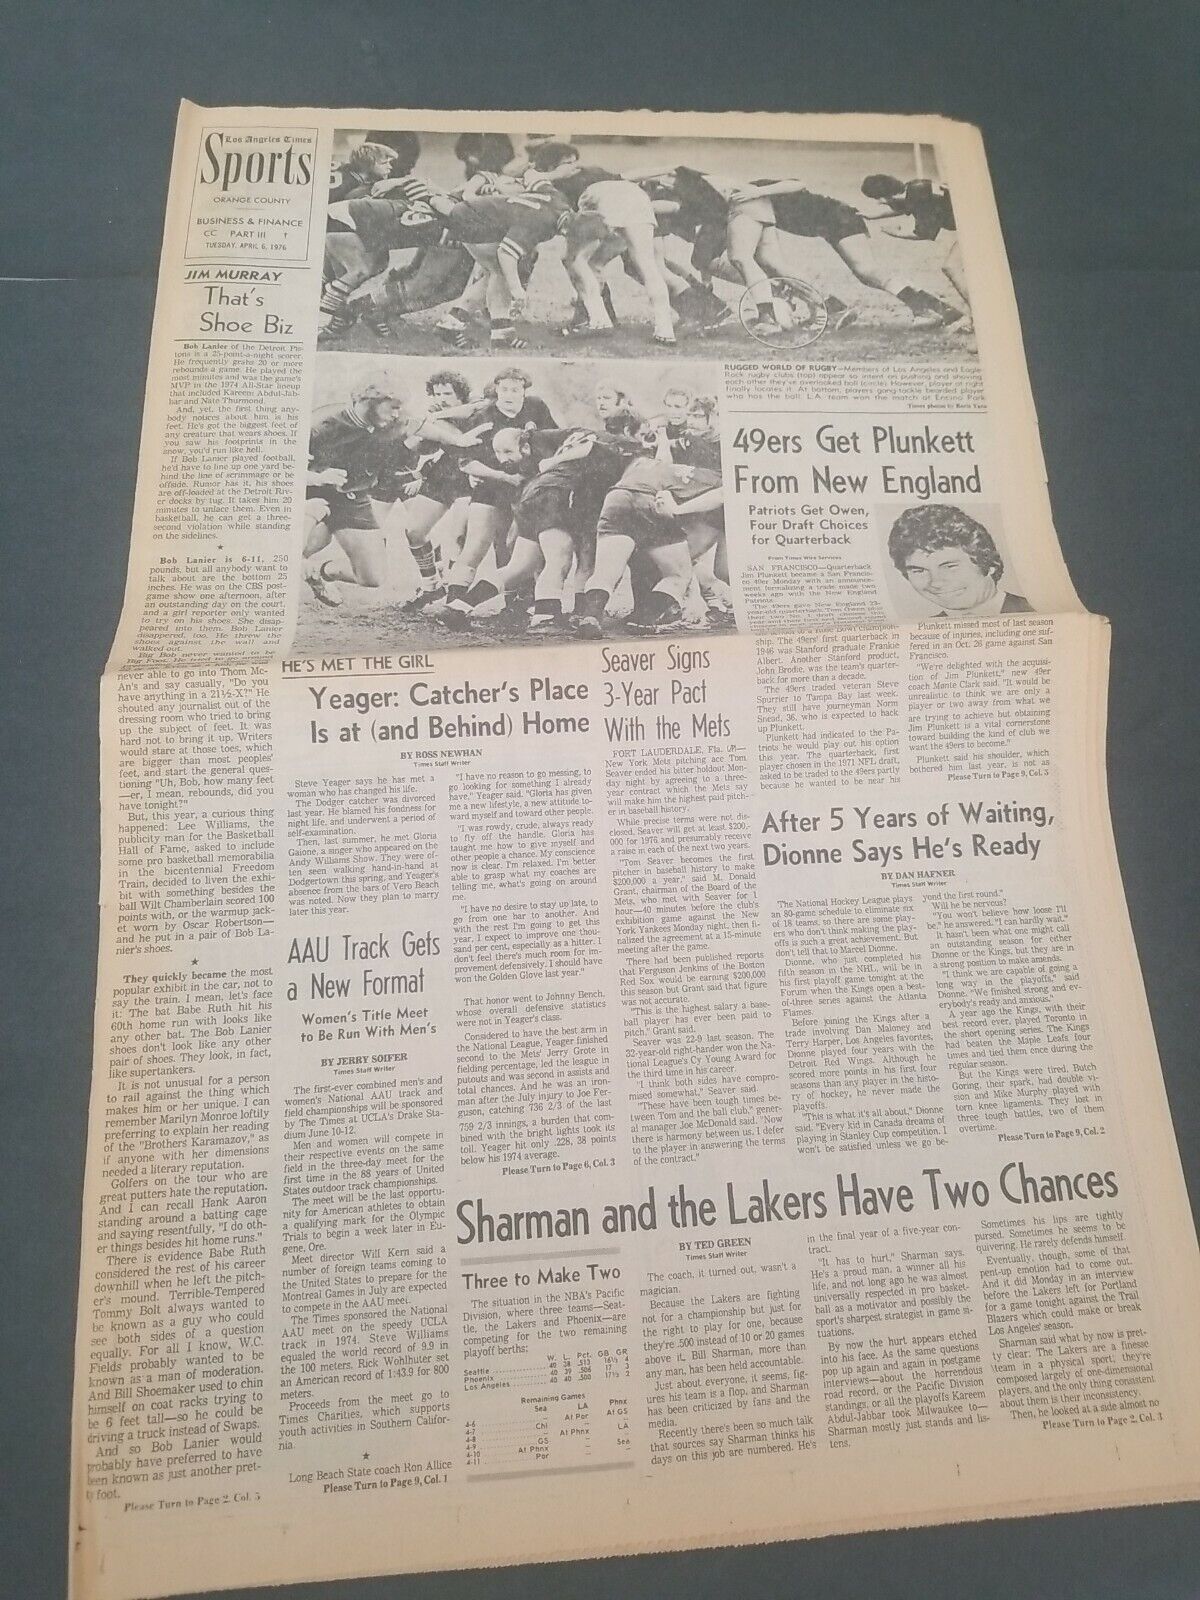 APRIL 6TH 1976 LOS ANGELES TIMES SPORTS SECTION 49ERS GET JIM PLUNKETT FROM PATS